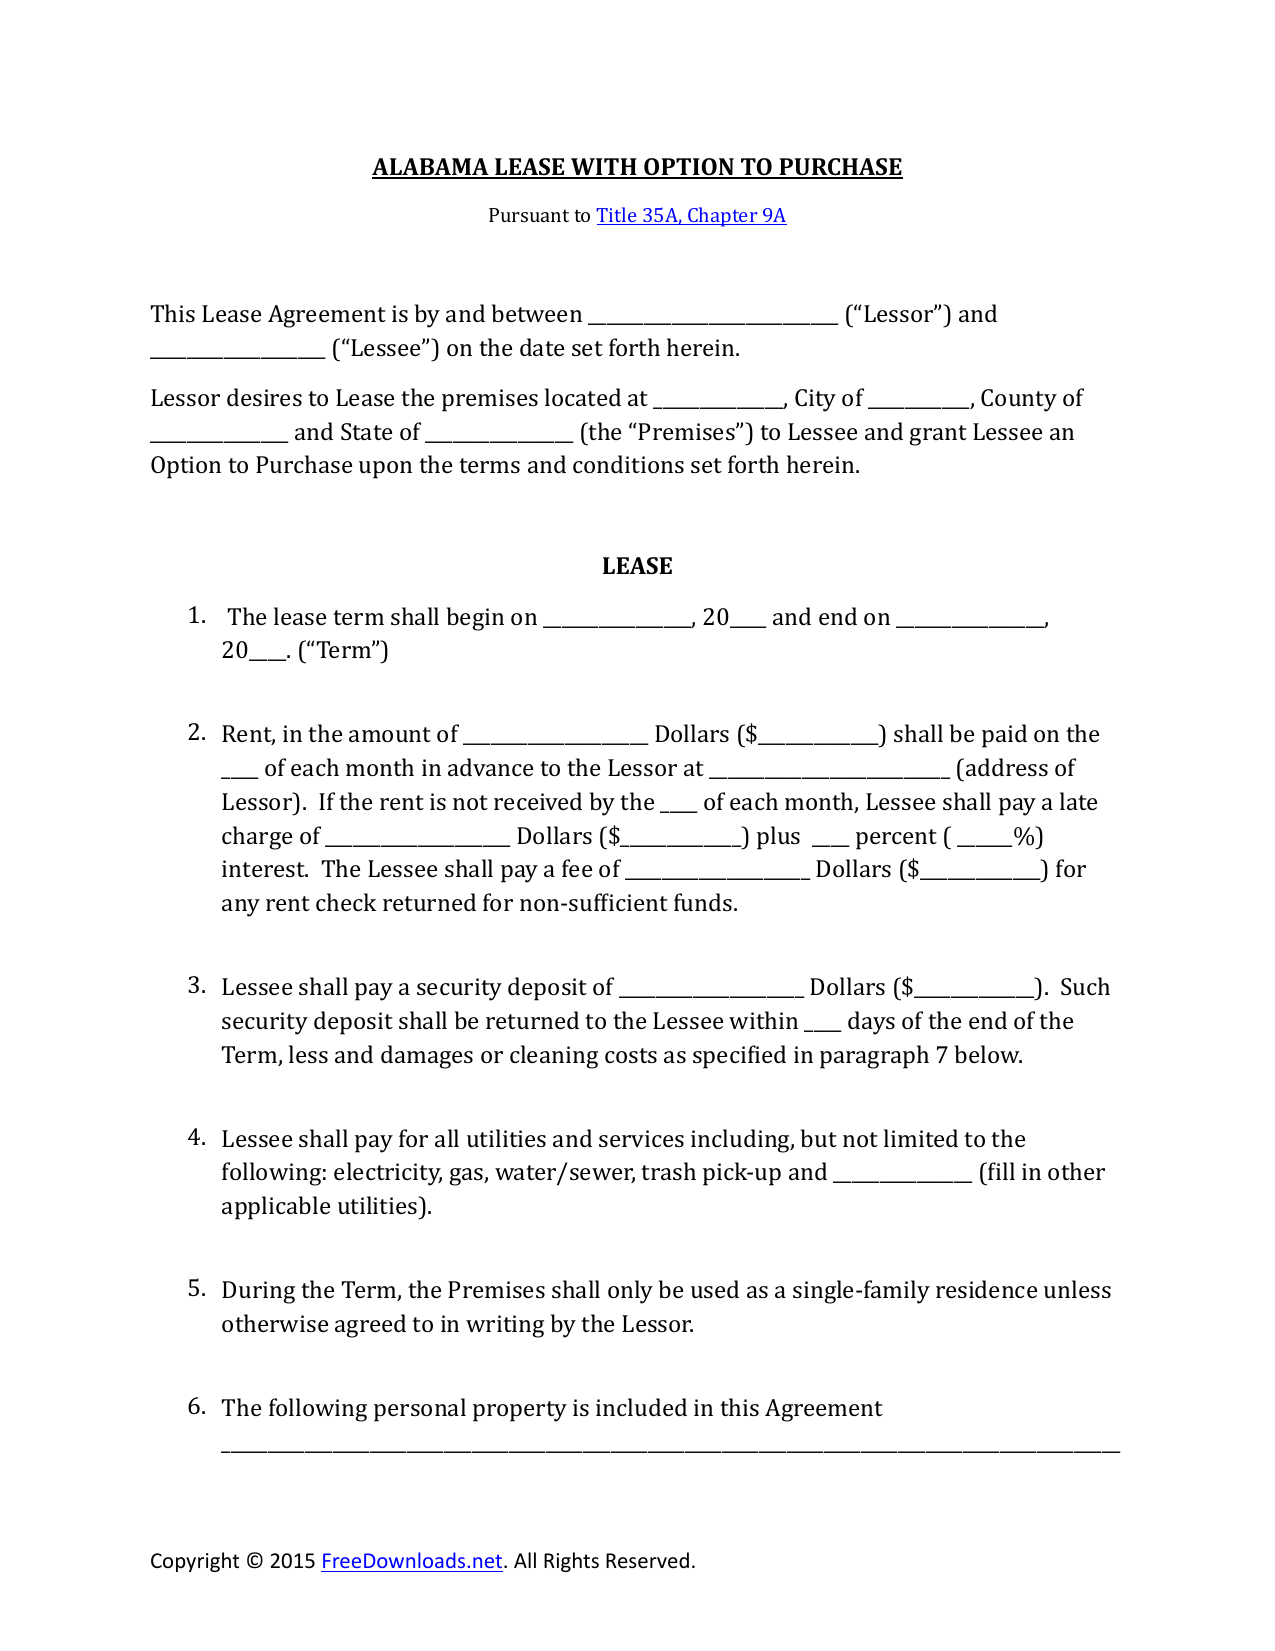 download-alabama-lease-purchase-rent-to-own-agreement-pdf-rtf